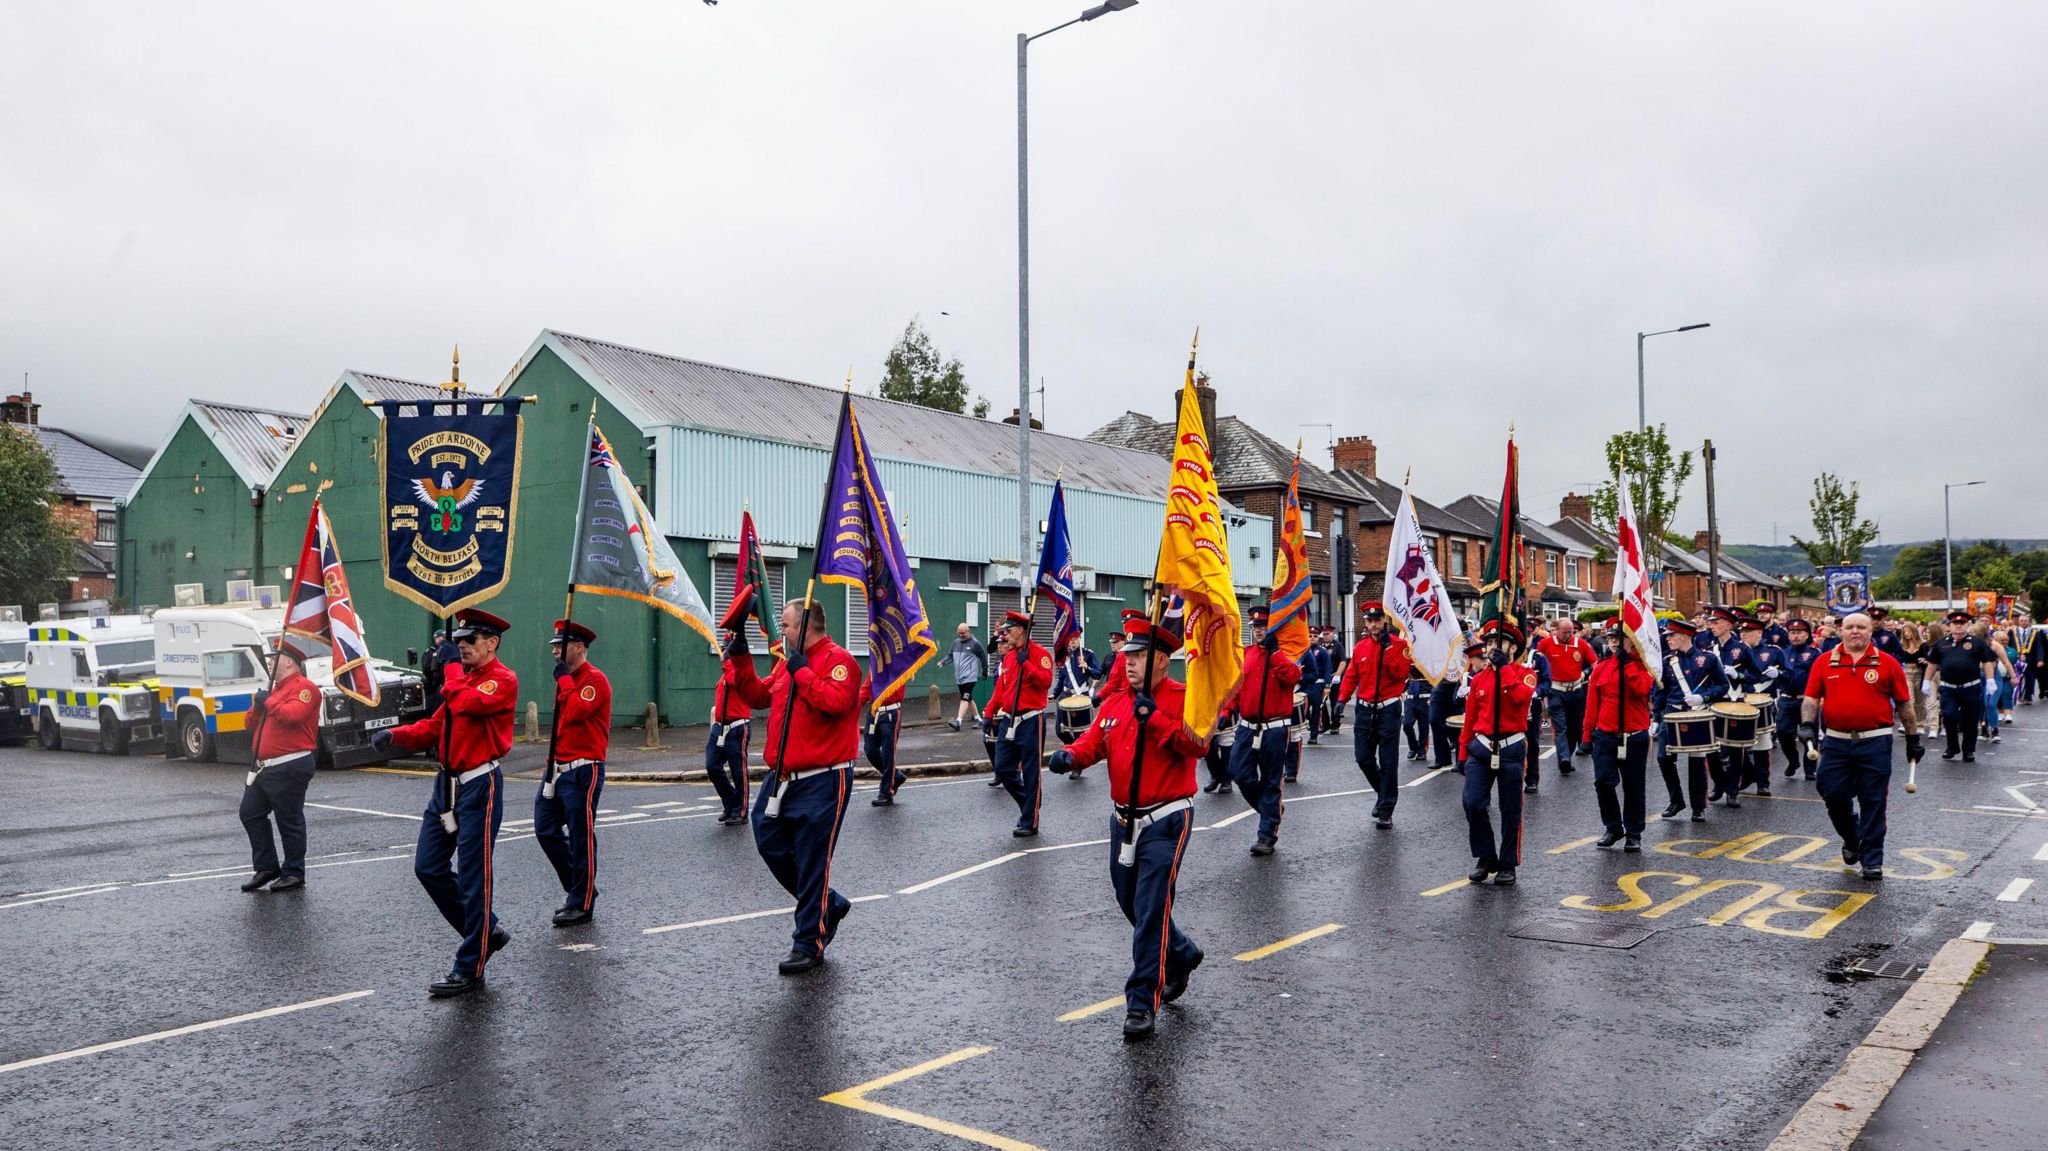 Men in red uniform carrying flags marching in a parade